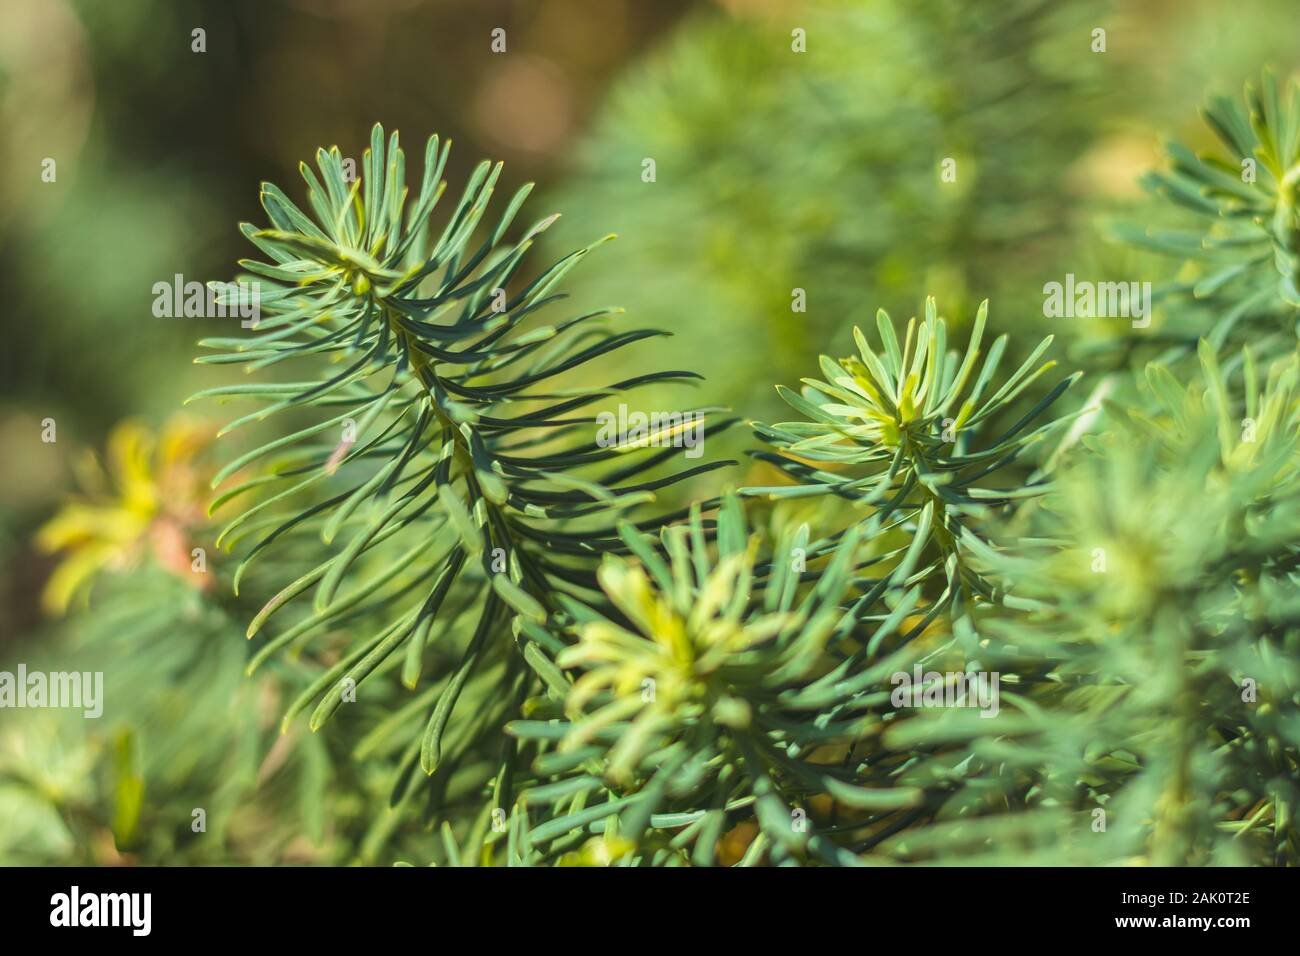 Euphorbia cyparissias - close-up view of green leaves of the cypress spurge plant Stock Photo